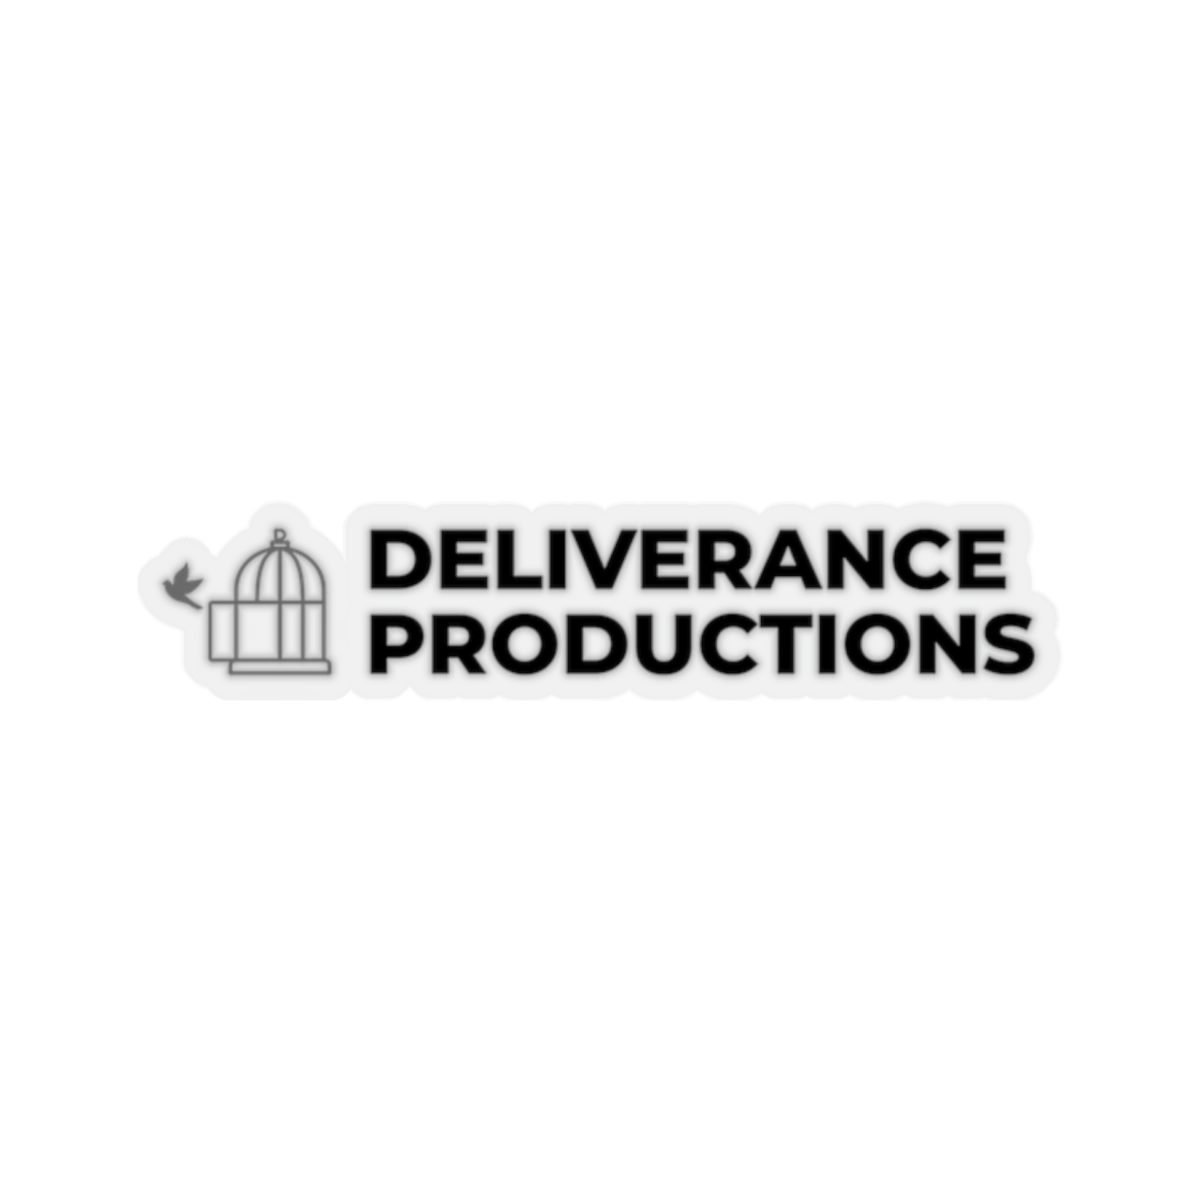 Deliverance Productions Logo Die Cut Stickers